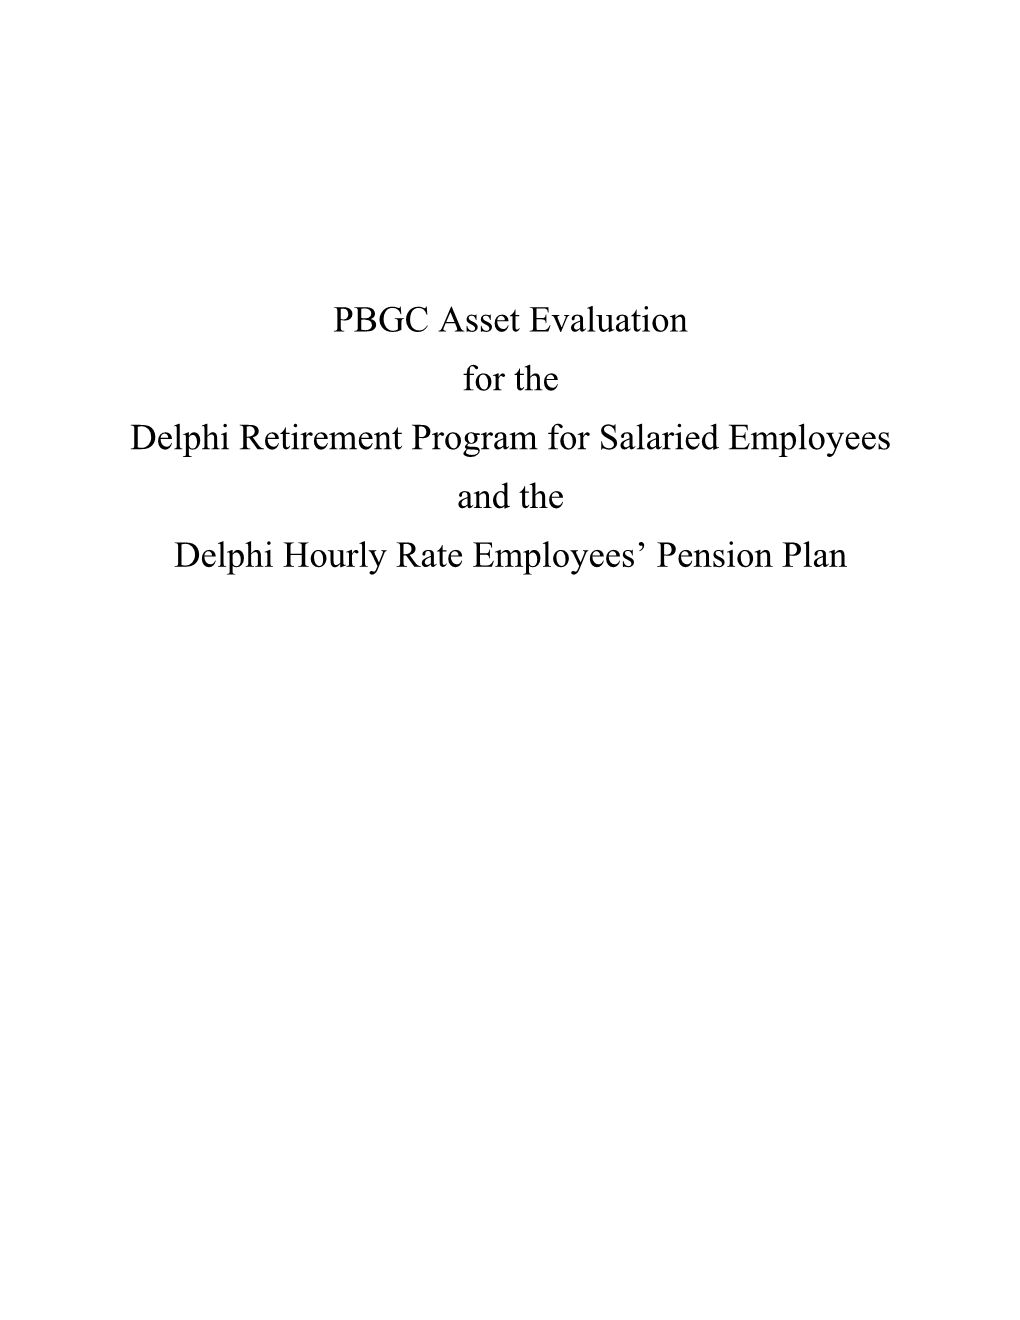 PBGC Asset Evaluation for the Delphi Retirement Program for Salaried Employees and the Delphi Hourly Rate Employees' Pension P